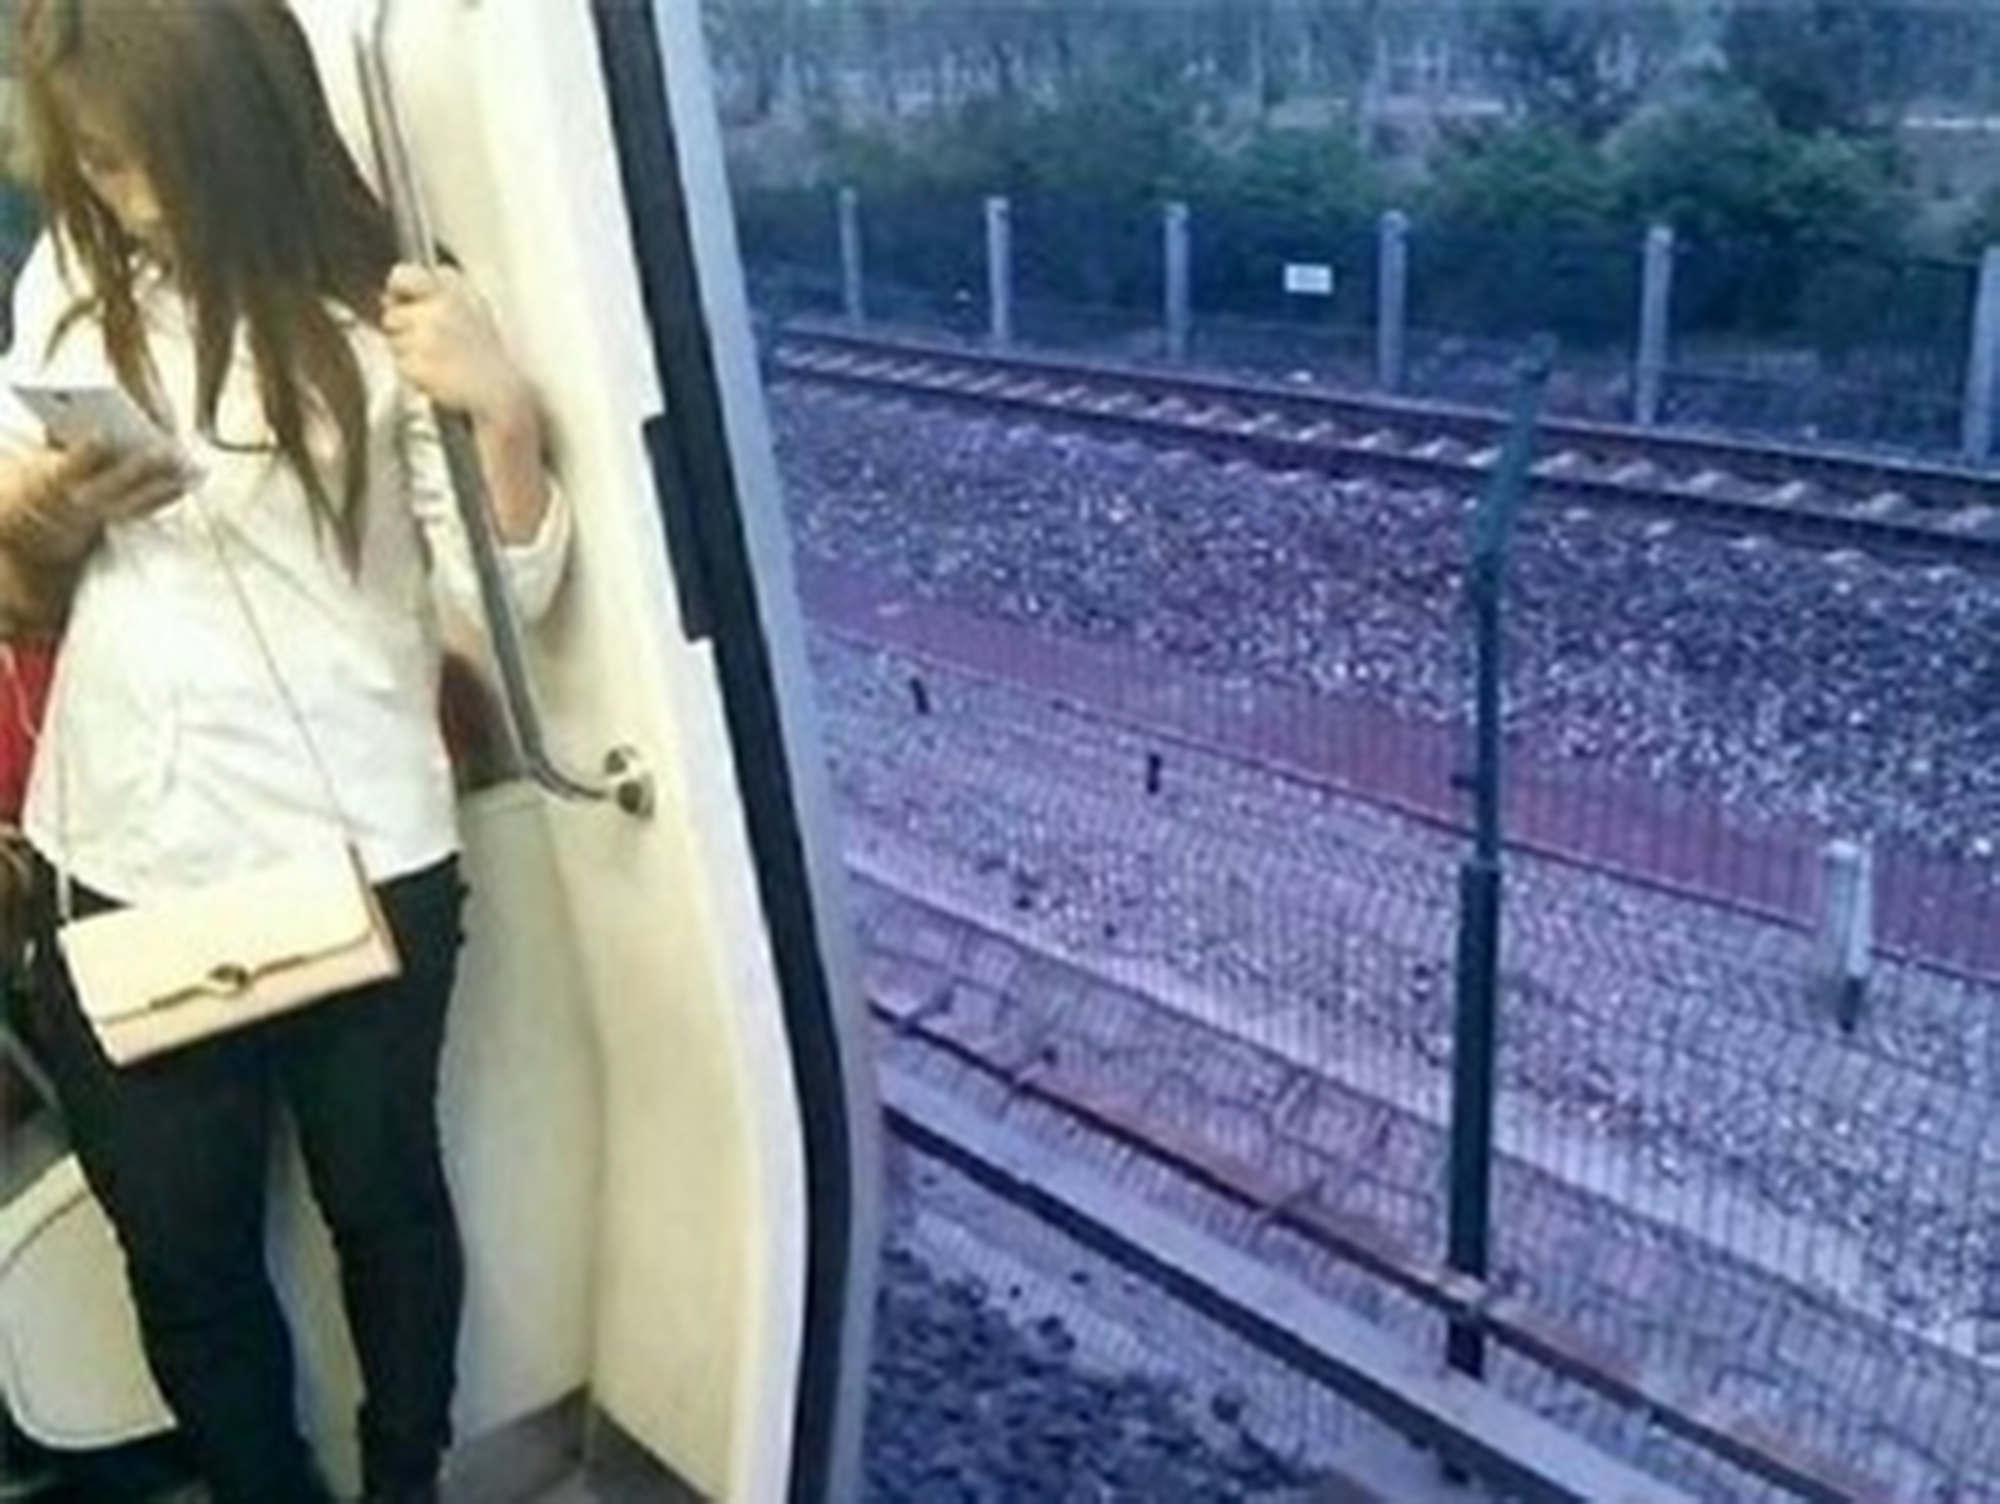 The train left Wudaokou station in Beijing without shutting its doors and travelled for about six minutes before stopping. Photo: Weibo 